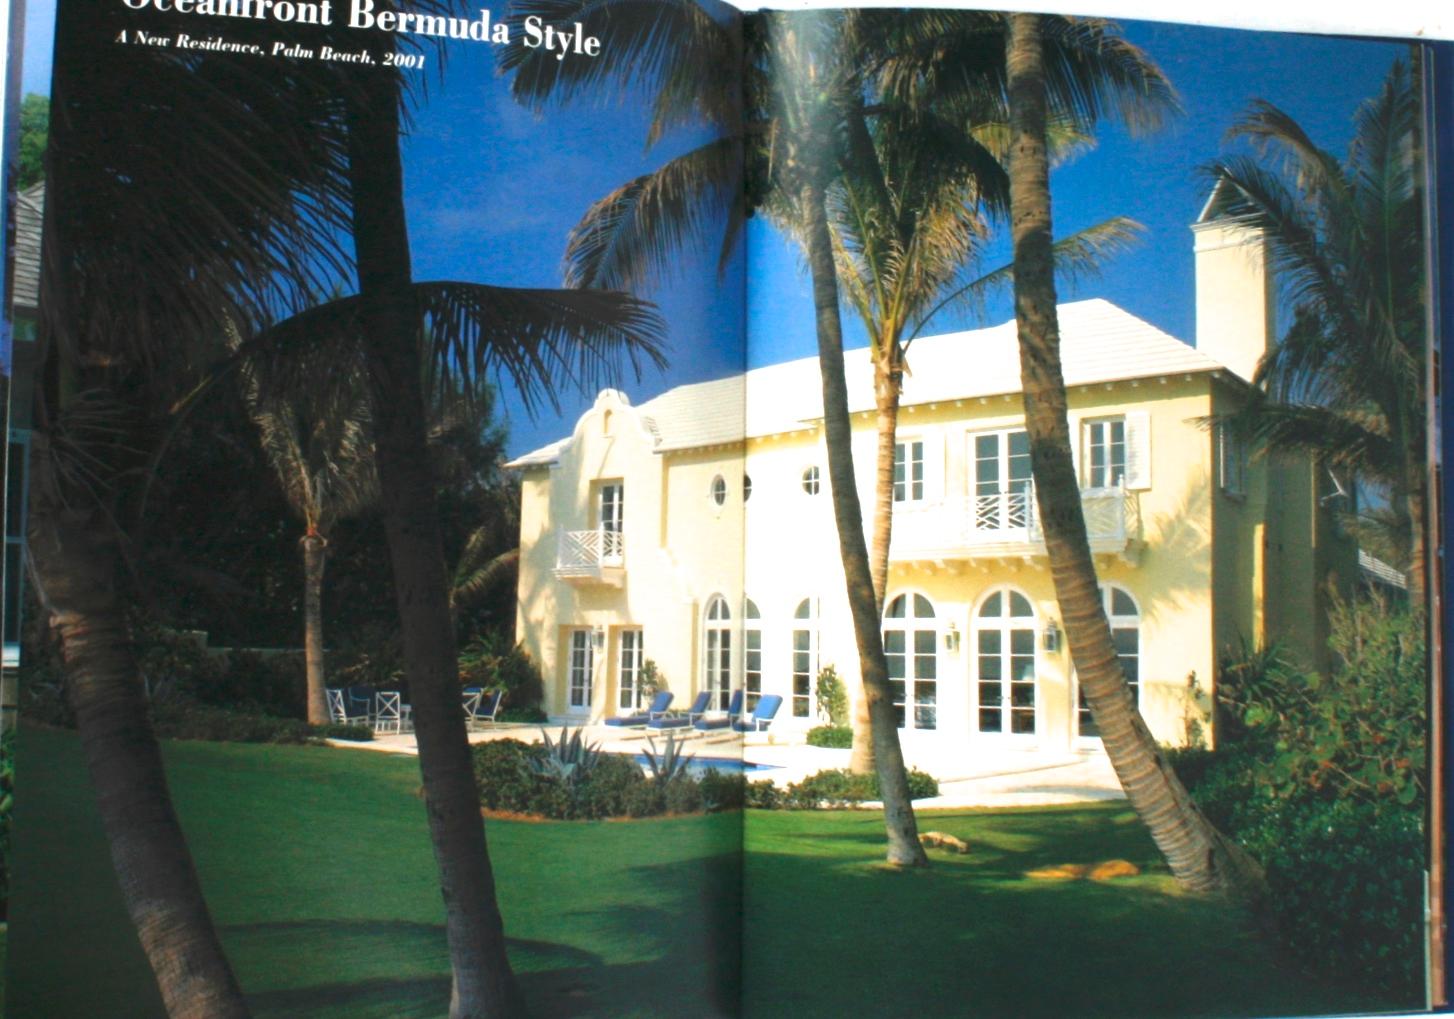 “Palm Beach Splendor, The Architecture of Jeffrey W. Smith” Signed First Edition 11